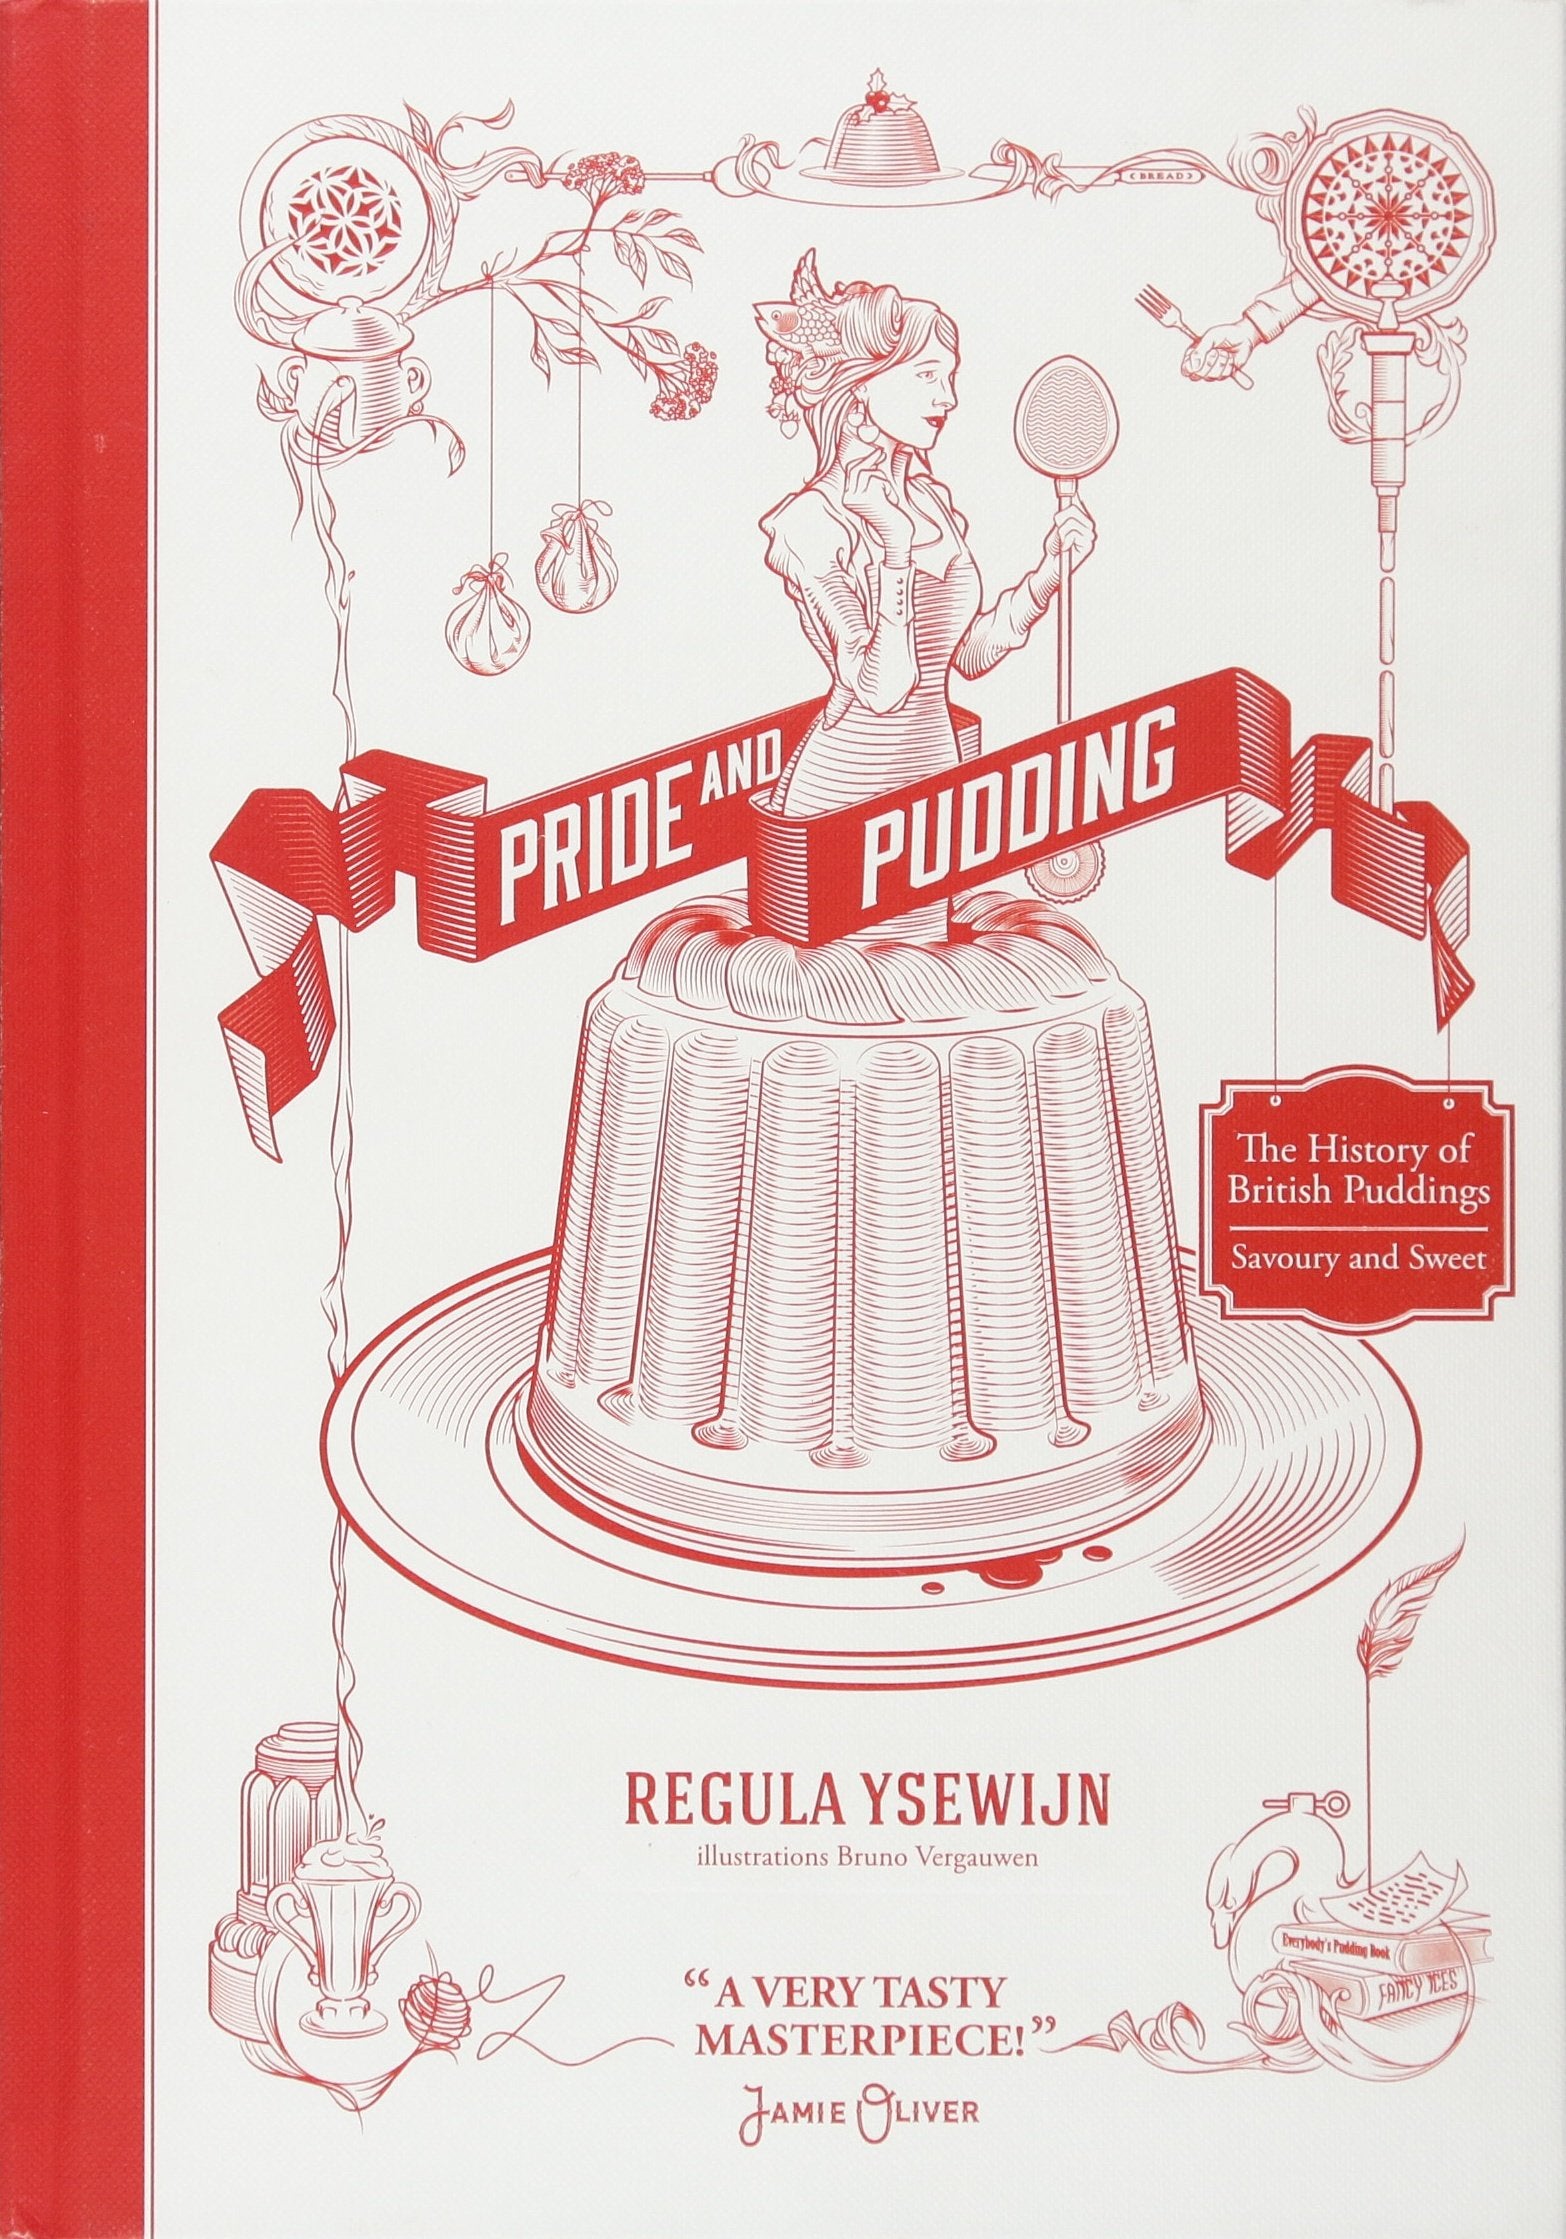 Pride & Pudding: The History of British Puddings, Savoury and Sweet (Regula Ysewijn) *Signed*